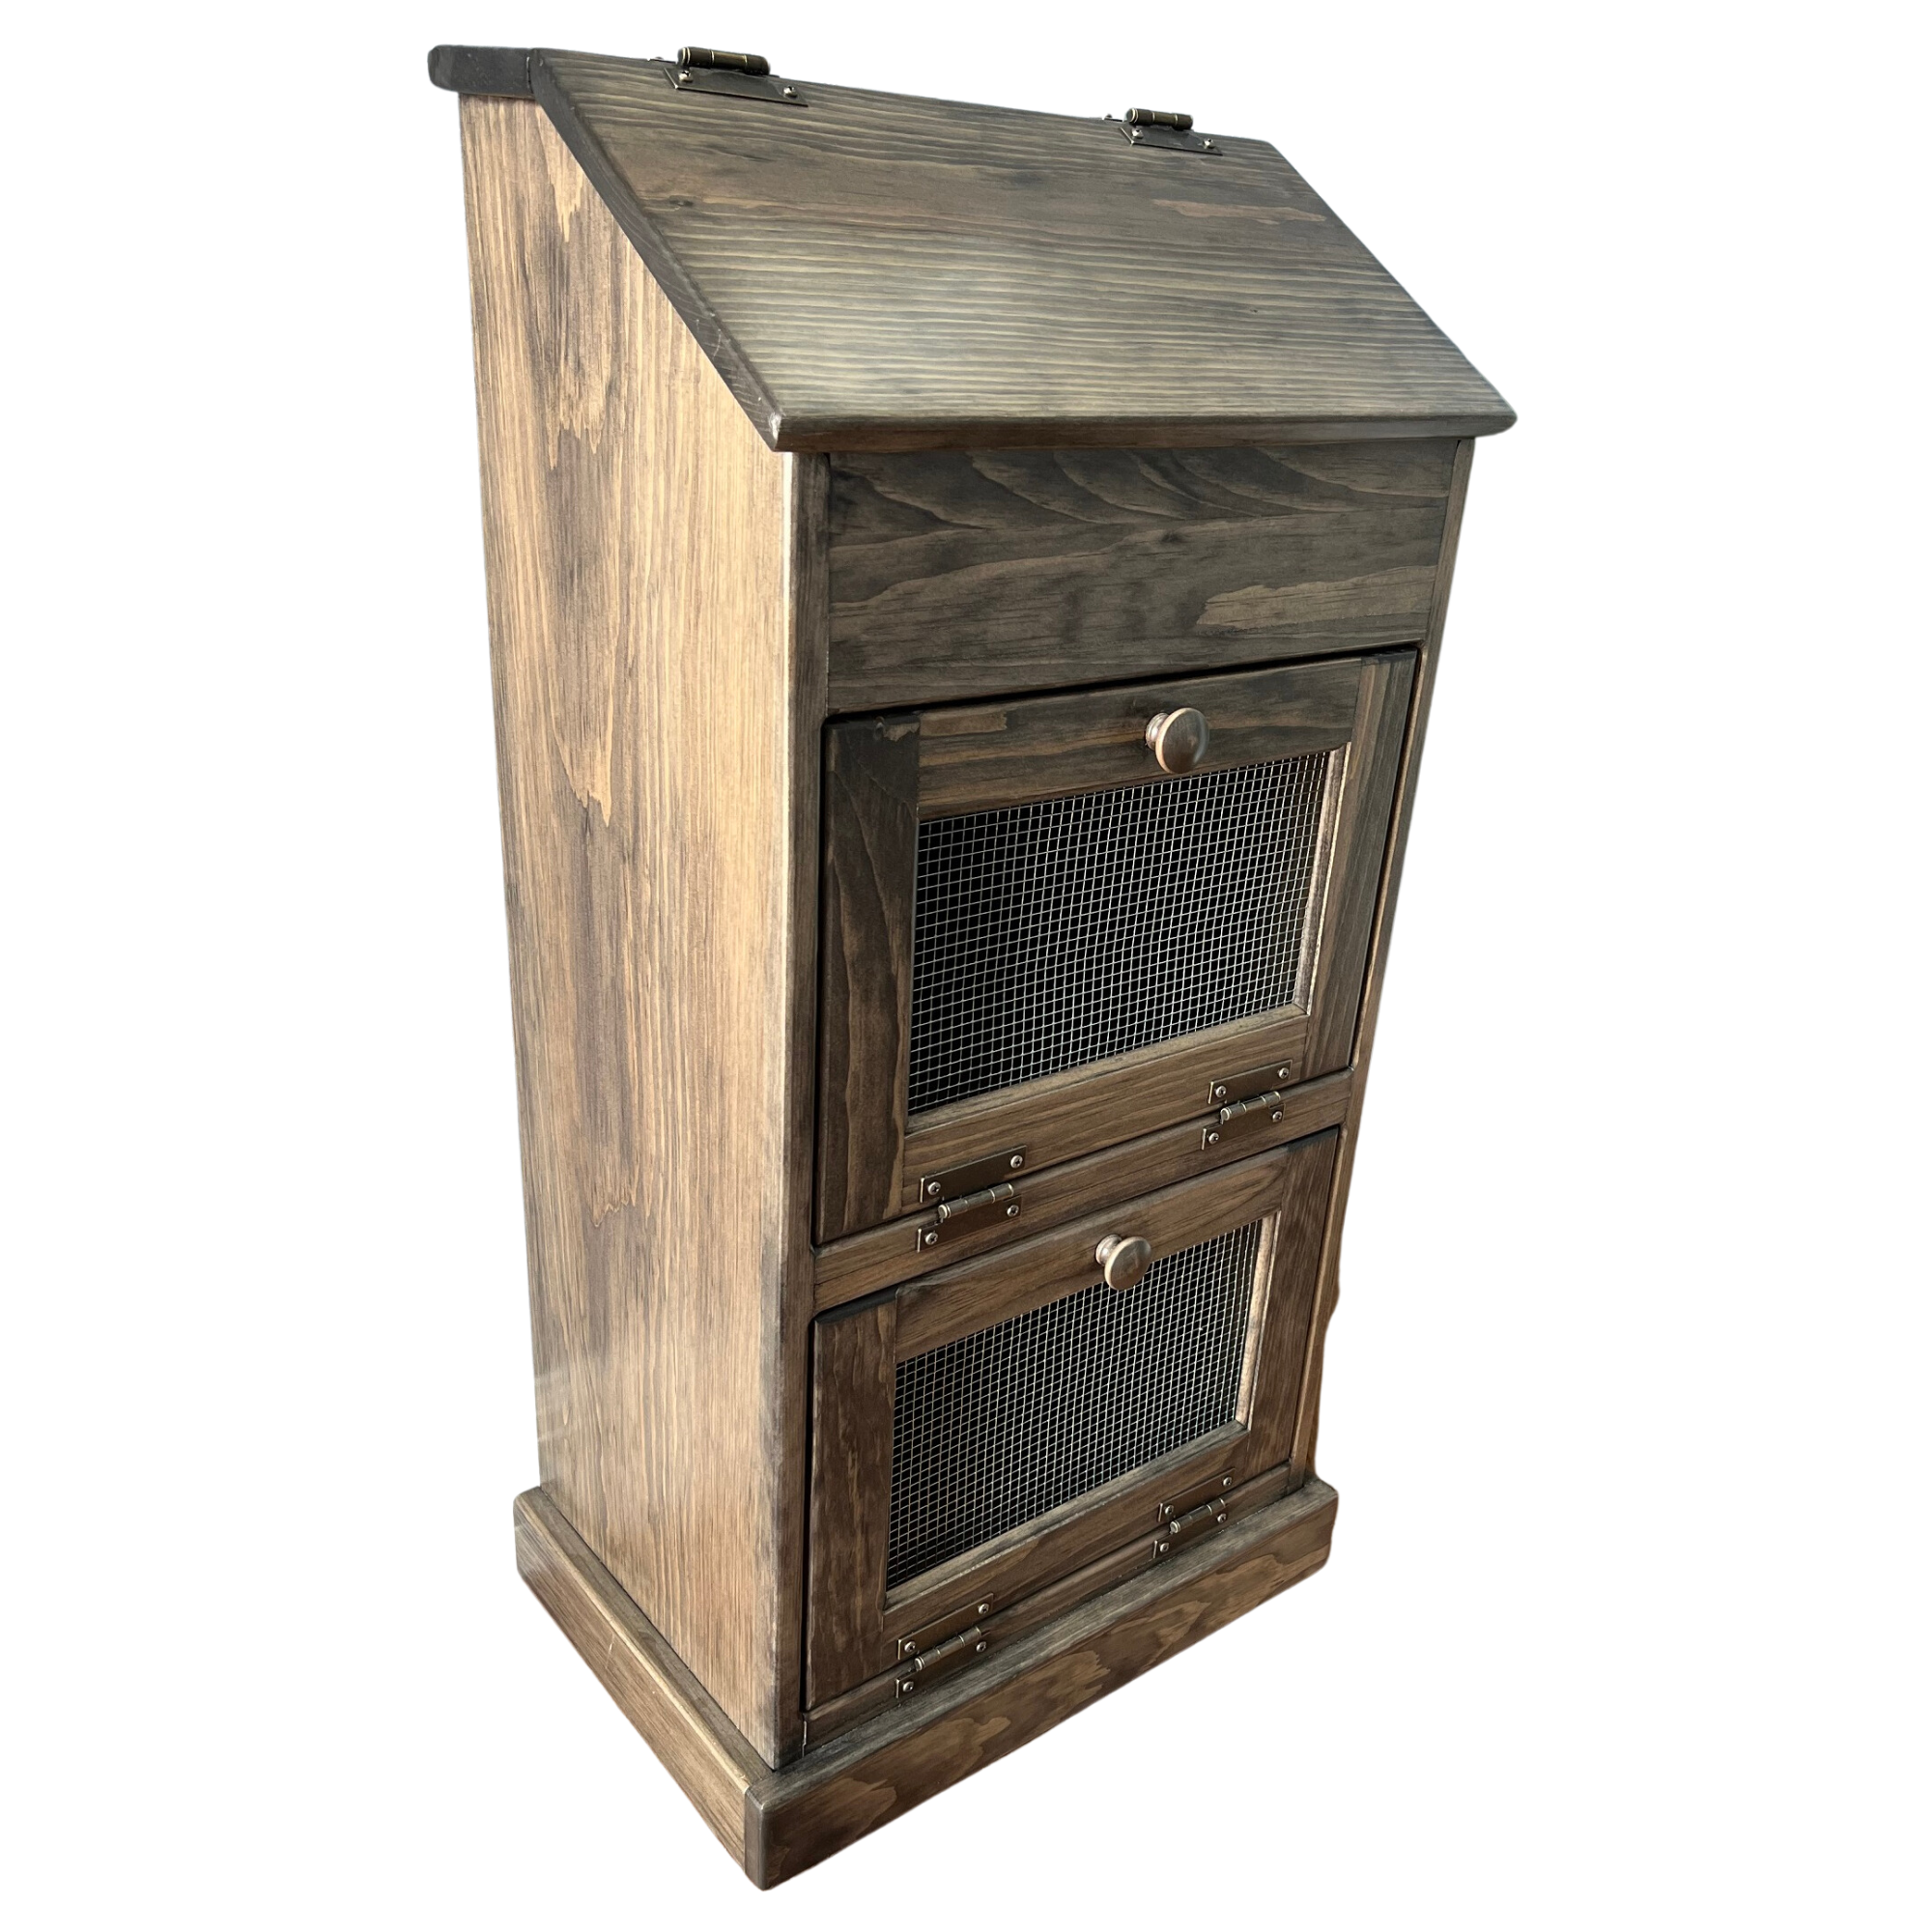 Amish Handcrafted Solid Wood Vegetable Bin / Cabinet - The Wood Reserve